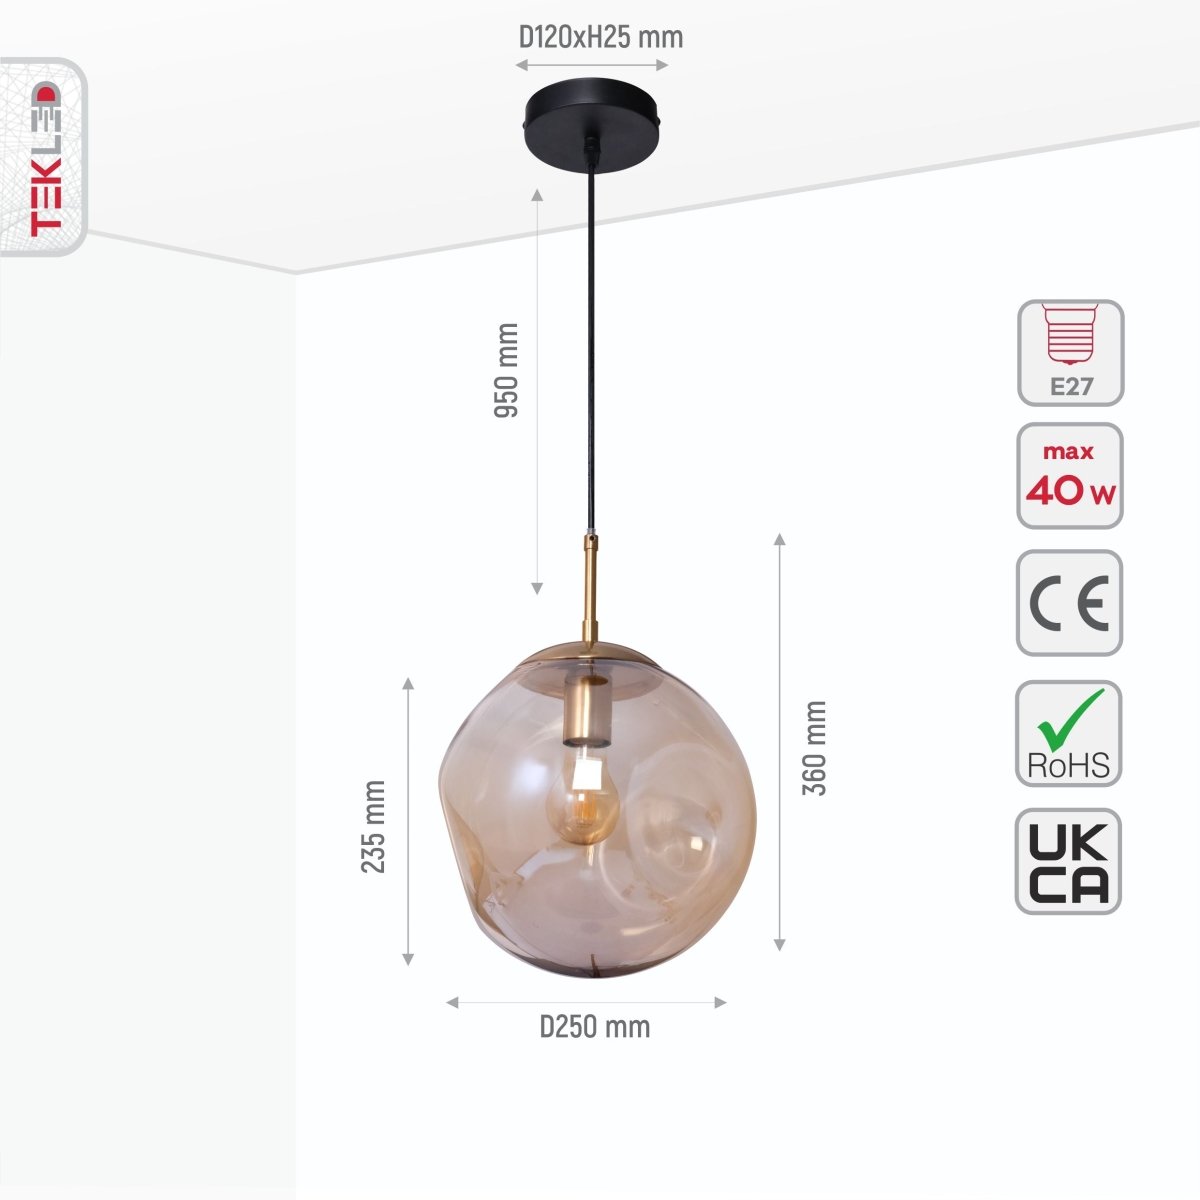 Size and specs of Amber Glass Crater Pendant Light with E27 Fitting | TEKLED 159-17342